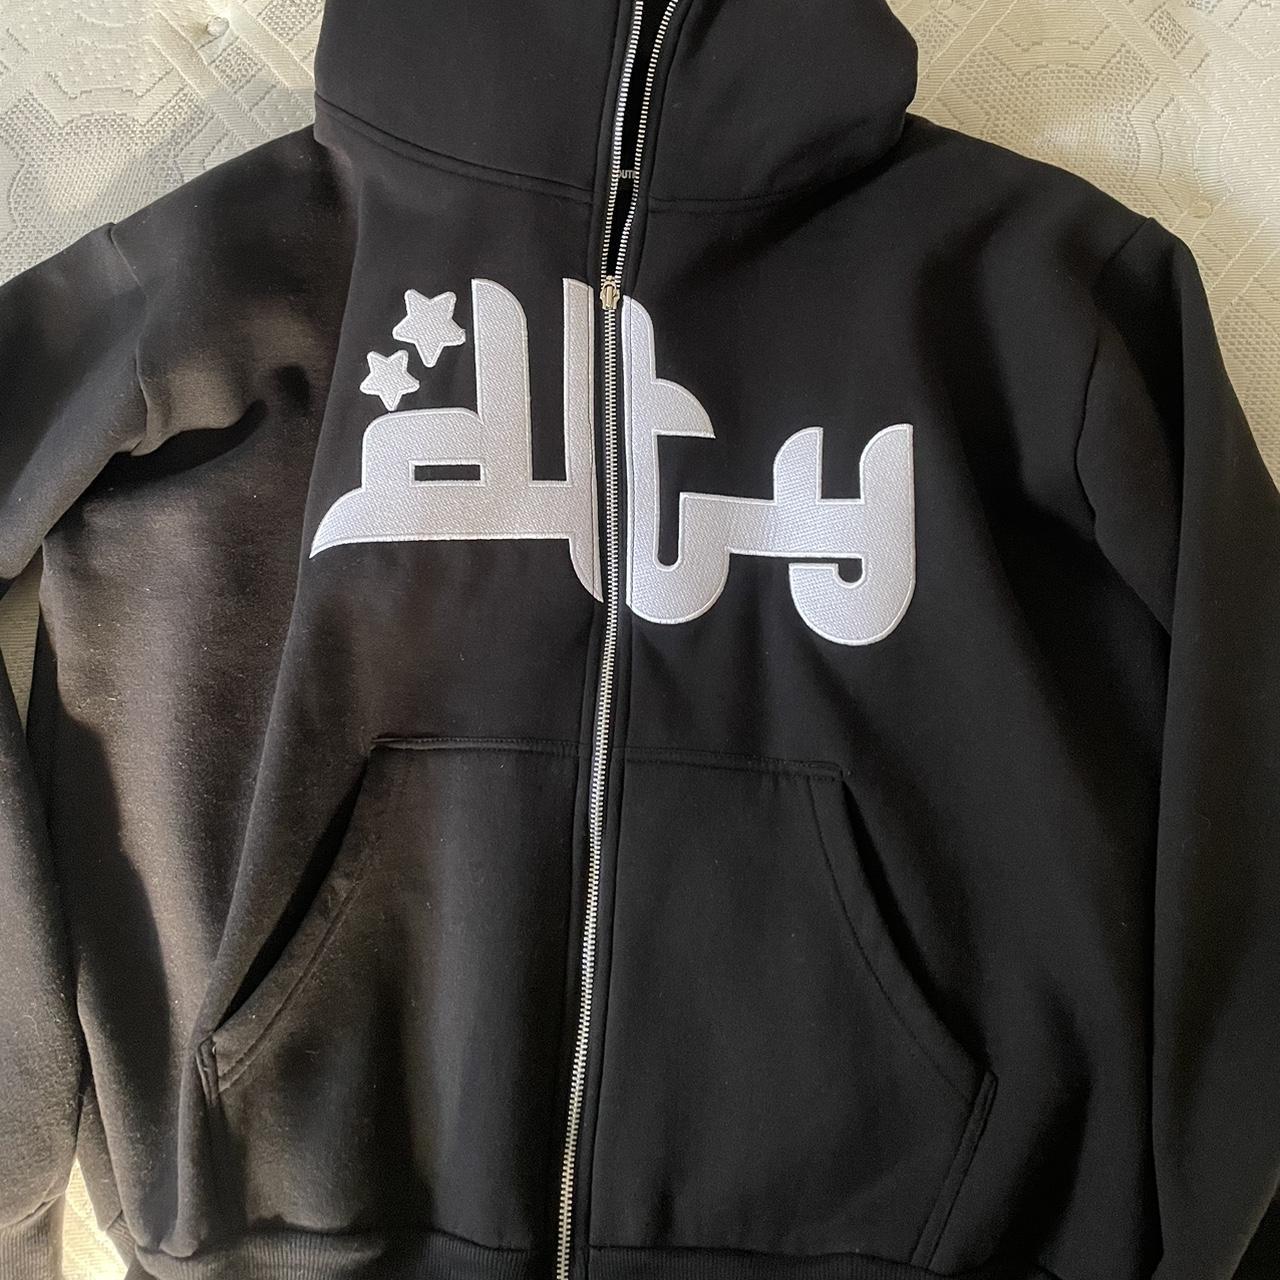 DIVIDE THE YOUTH FULLZIP SIZE XL - Depop